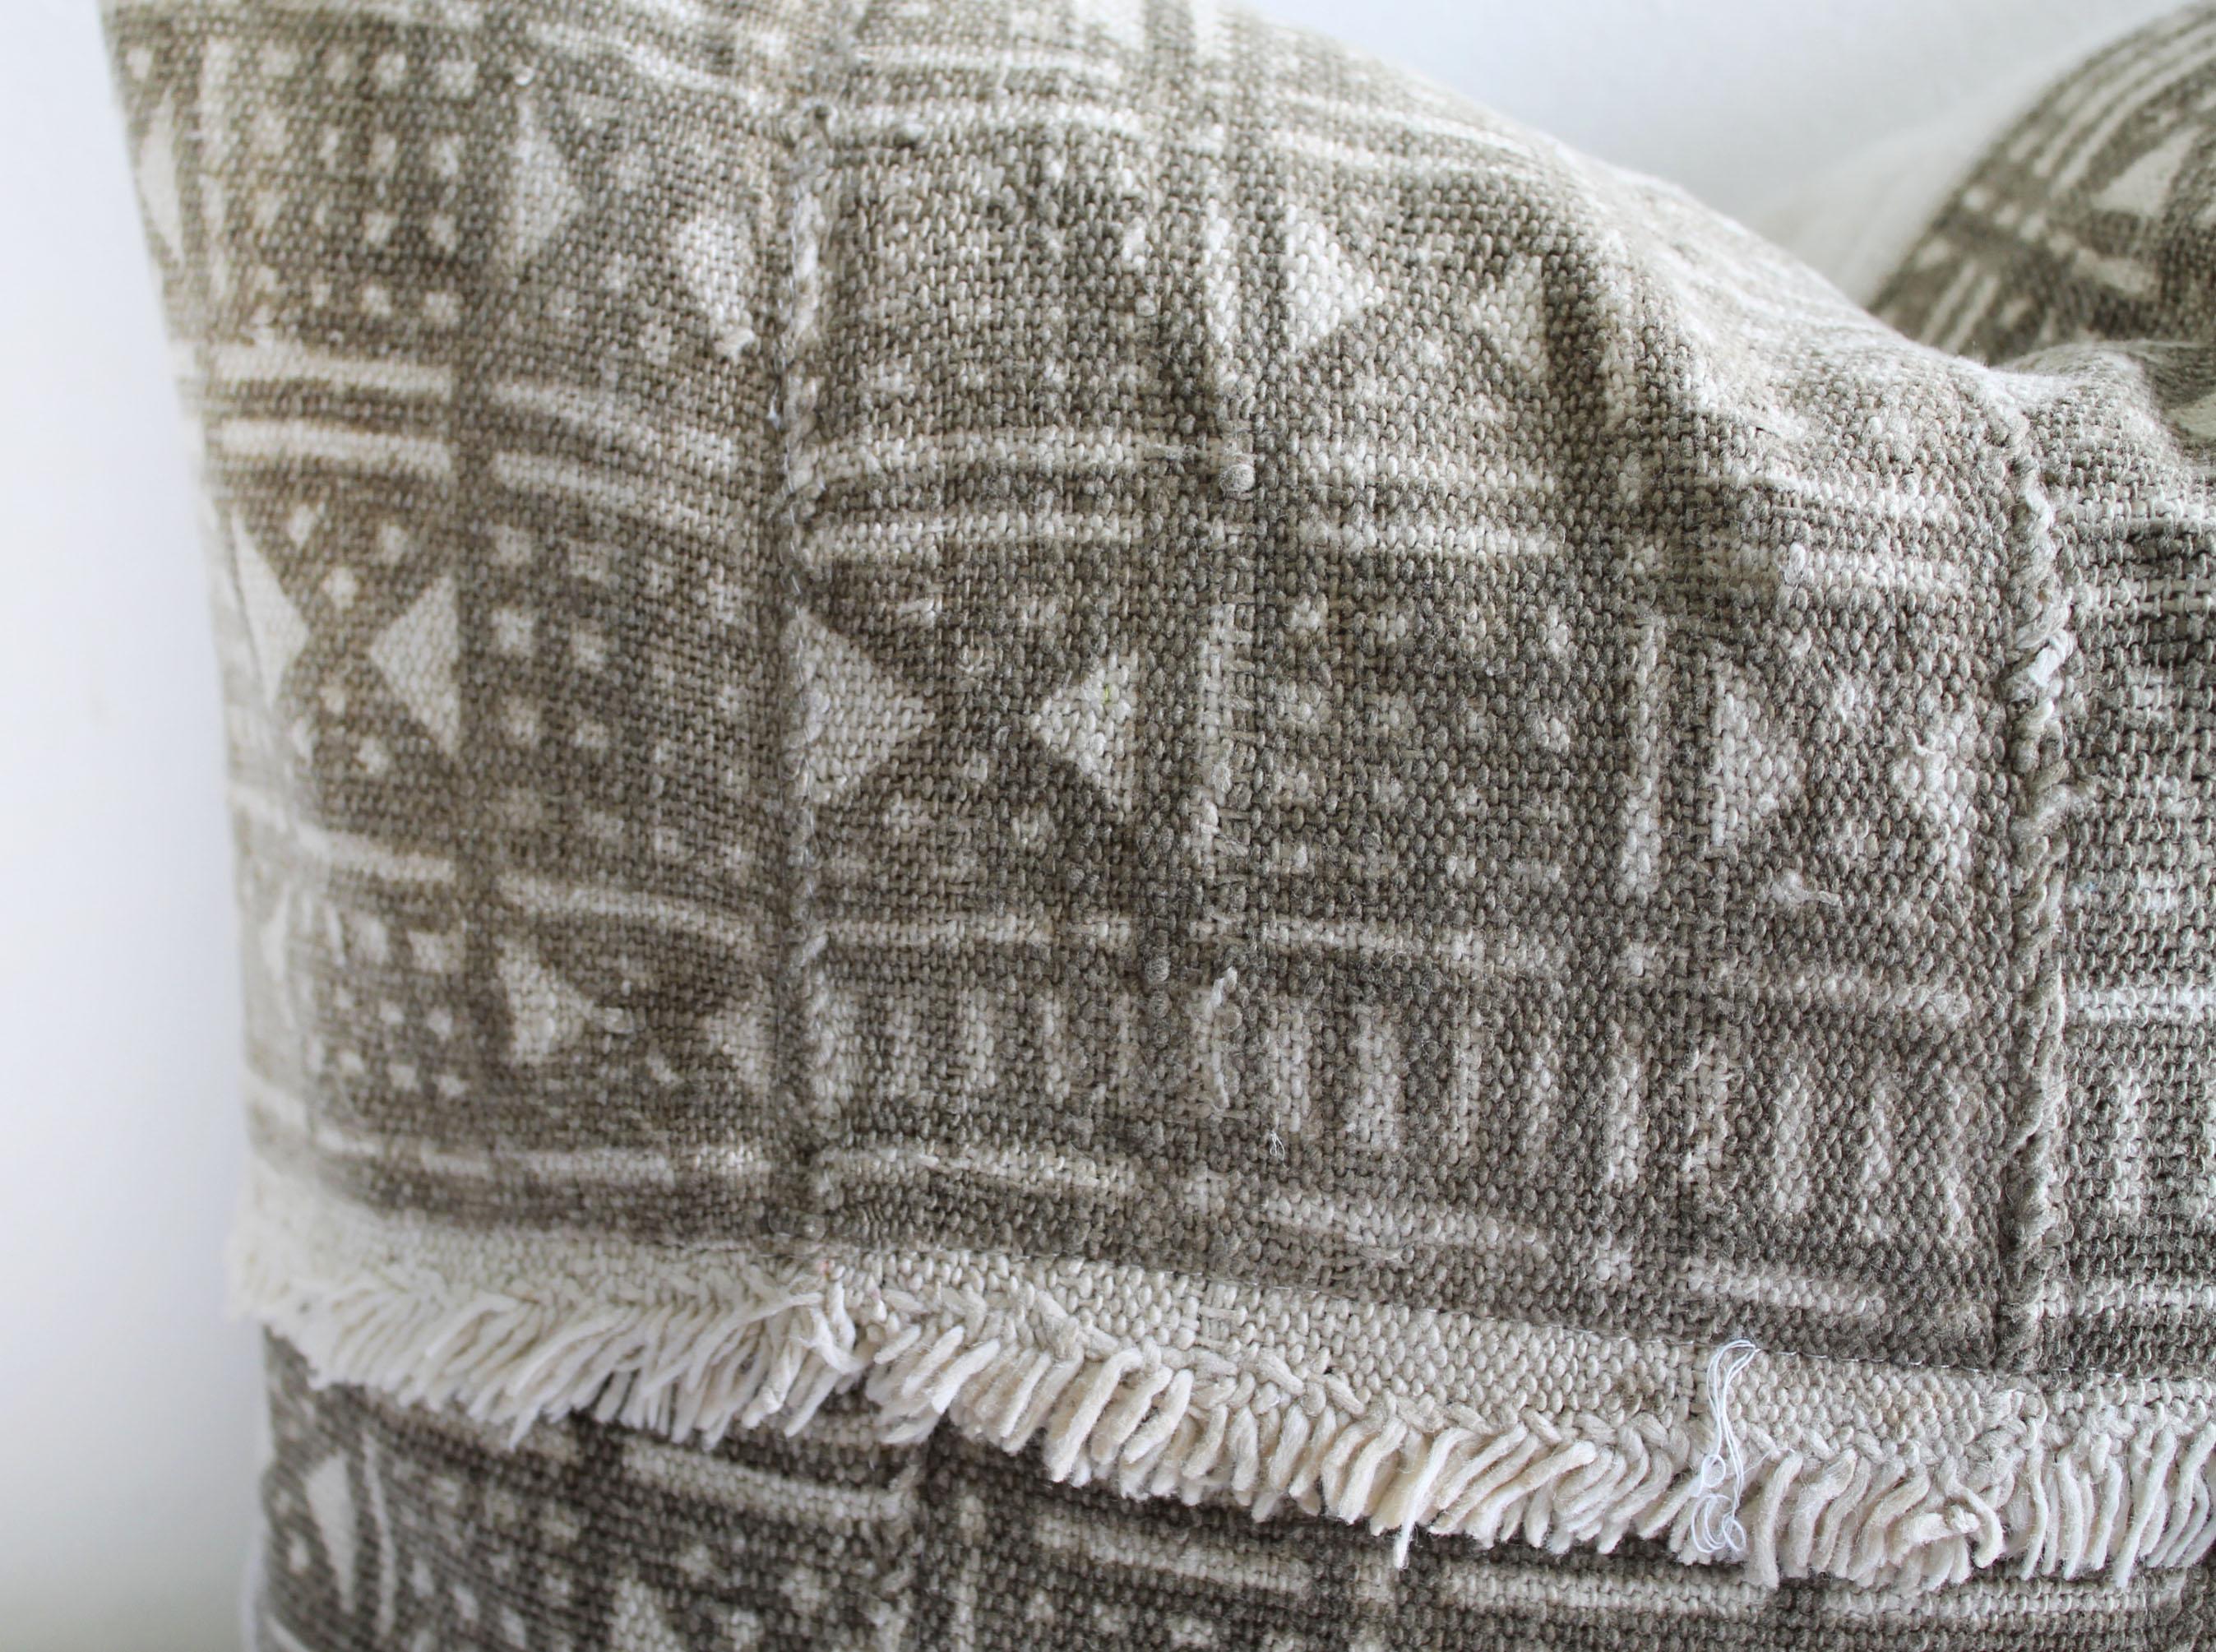 Beautiful vintage South African Mali Cloth face pillow, constructed with the original fringe details. The face is lined with muslin, and back is 100% European Linen. Our pillows are constructed with vintage one of a kind textiles from around the